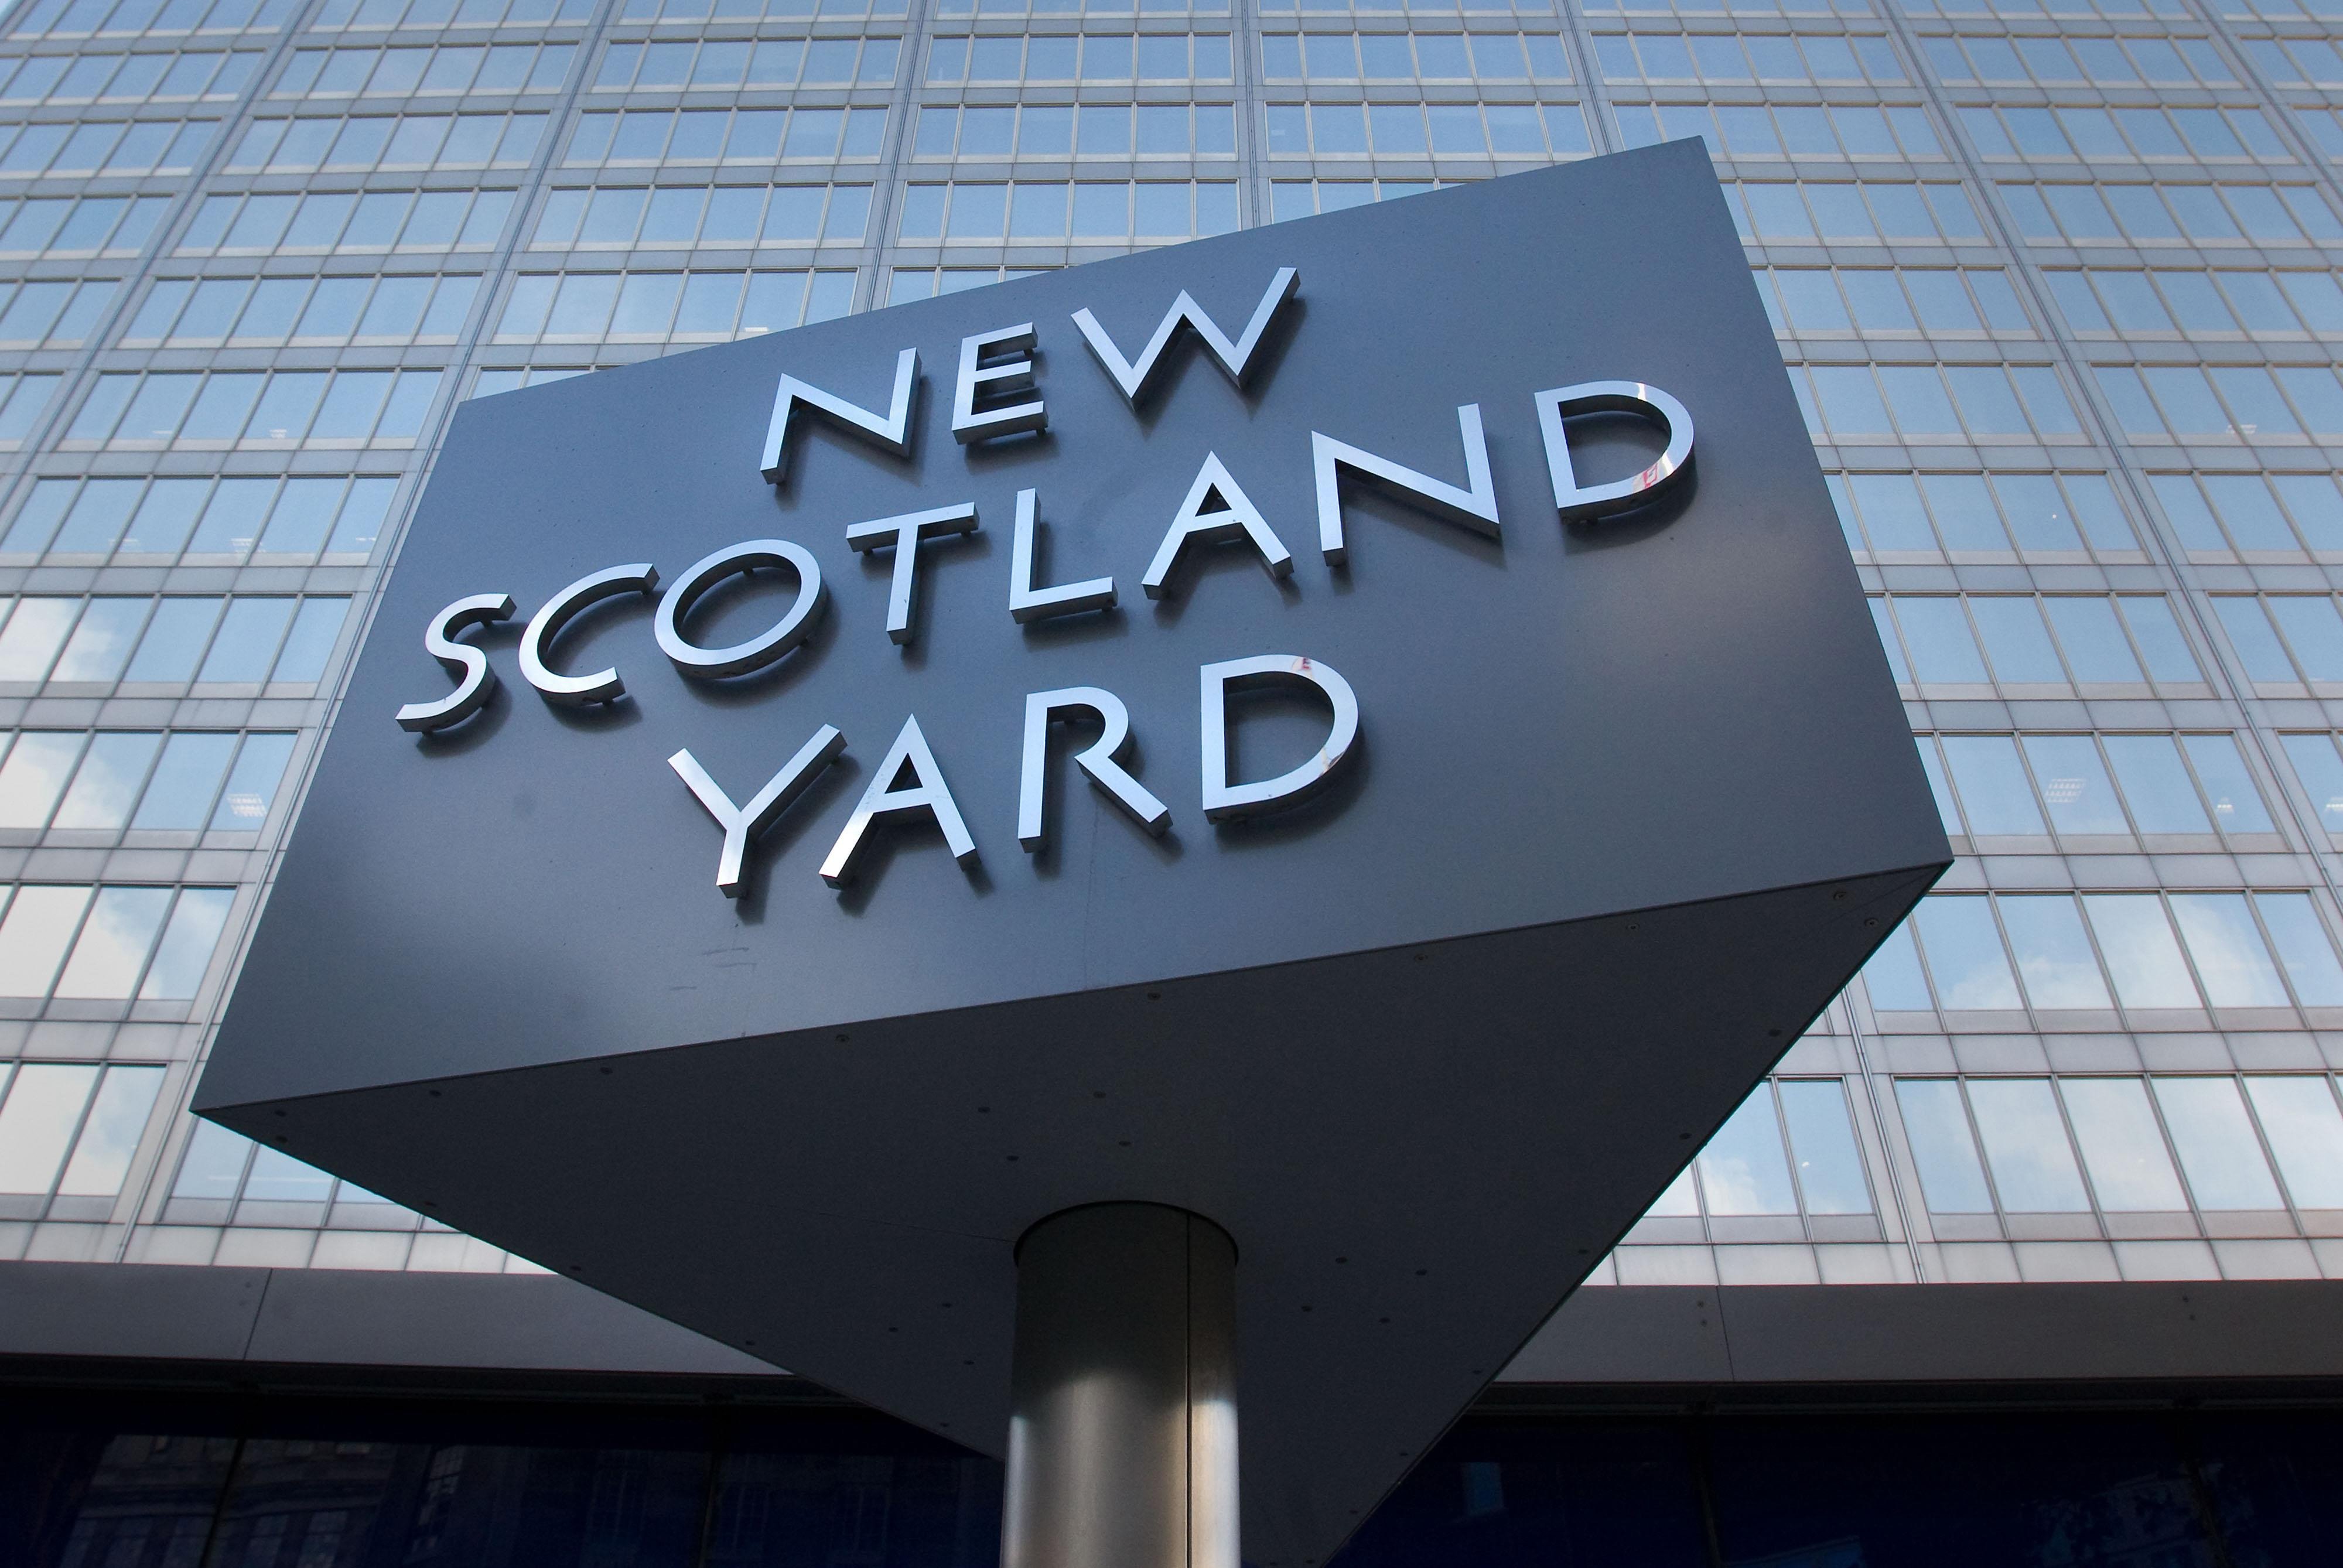 Scotland Yard today is at the forefront for its technologies. Here you have how the british police forces evolved